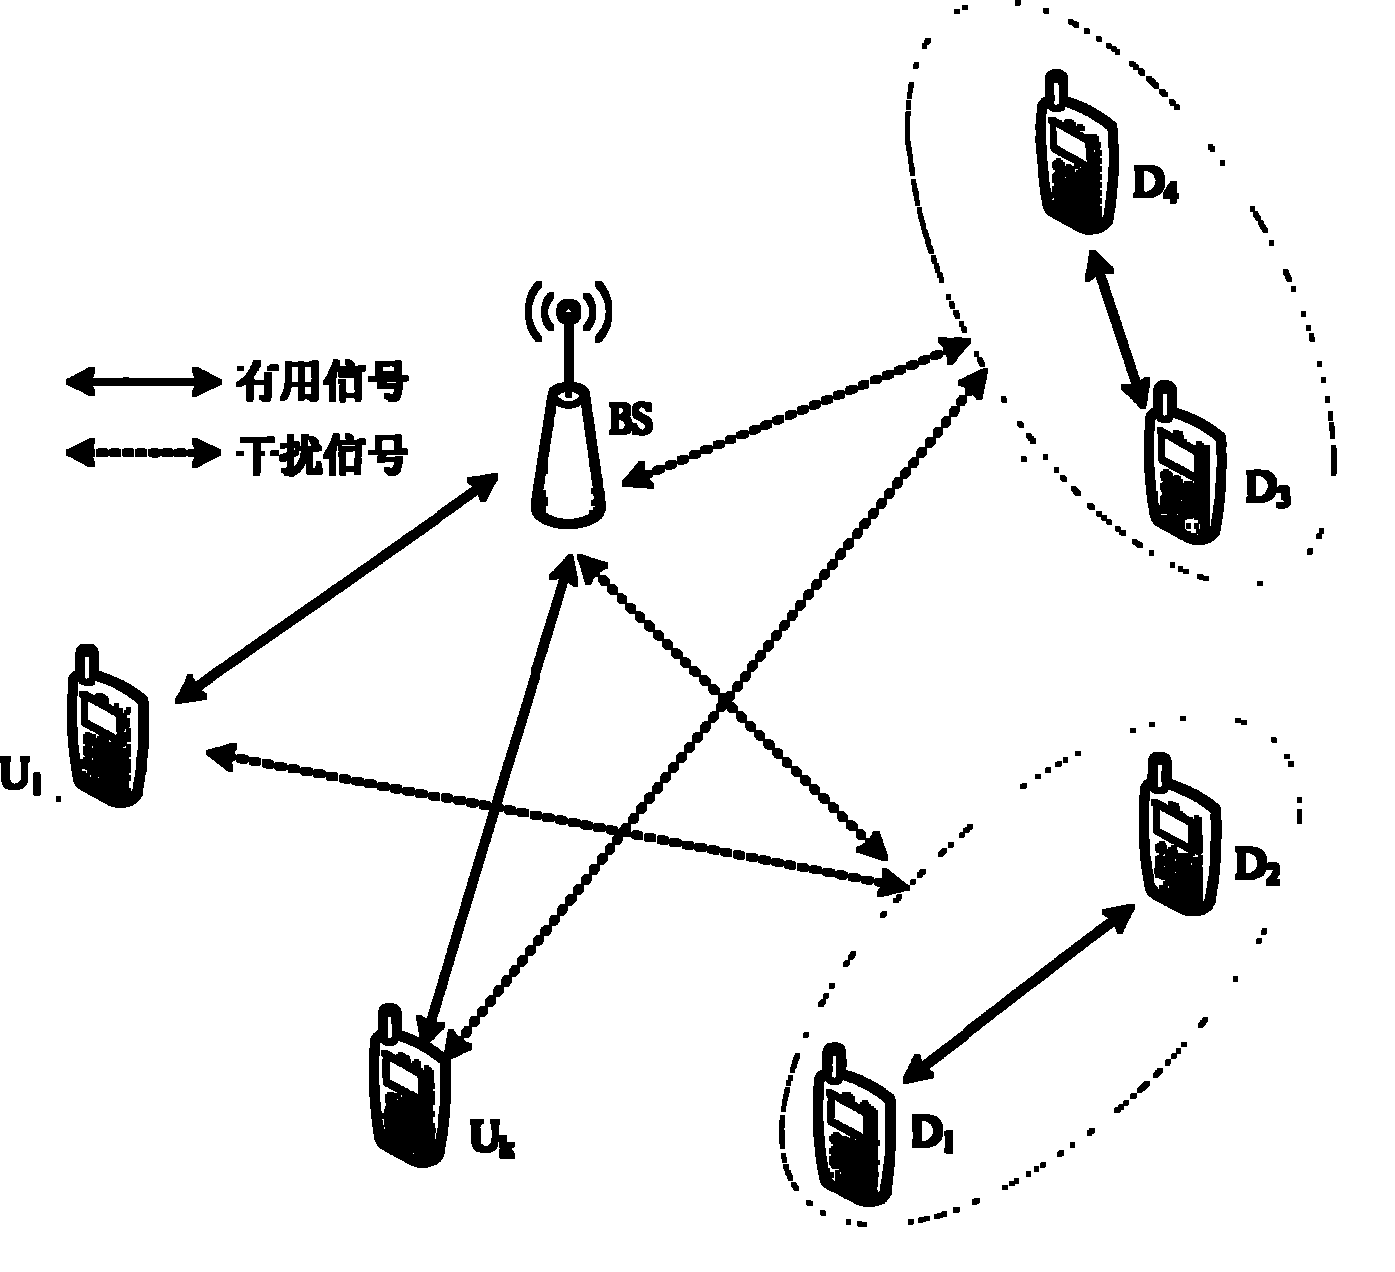 Method for multiplexing cellular user resources of device-to-device (D2D) user pairs based on base station positioning